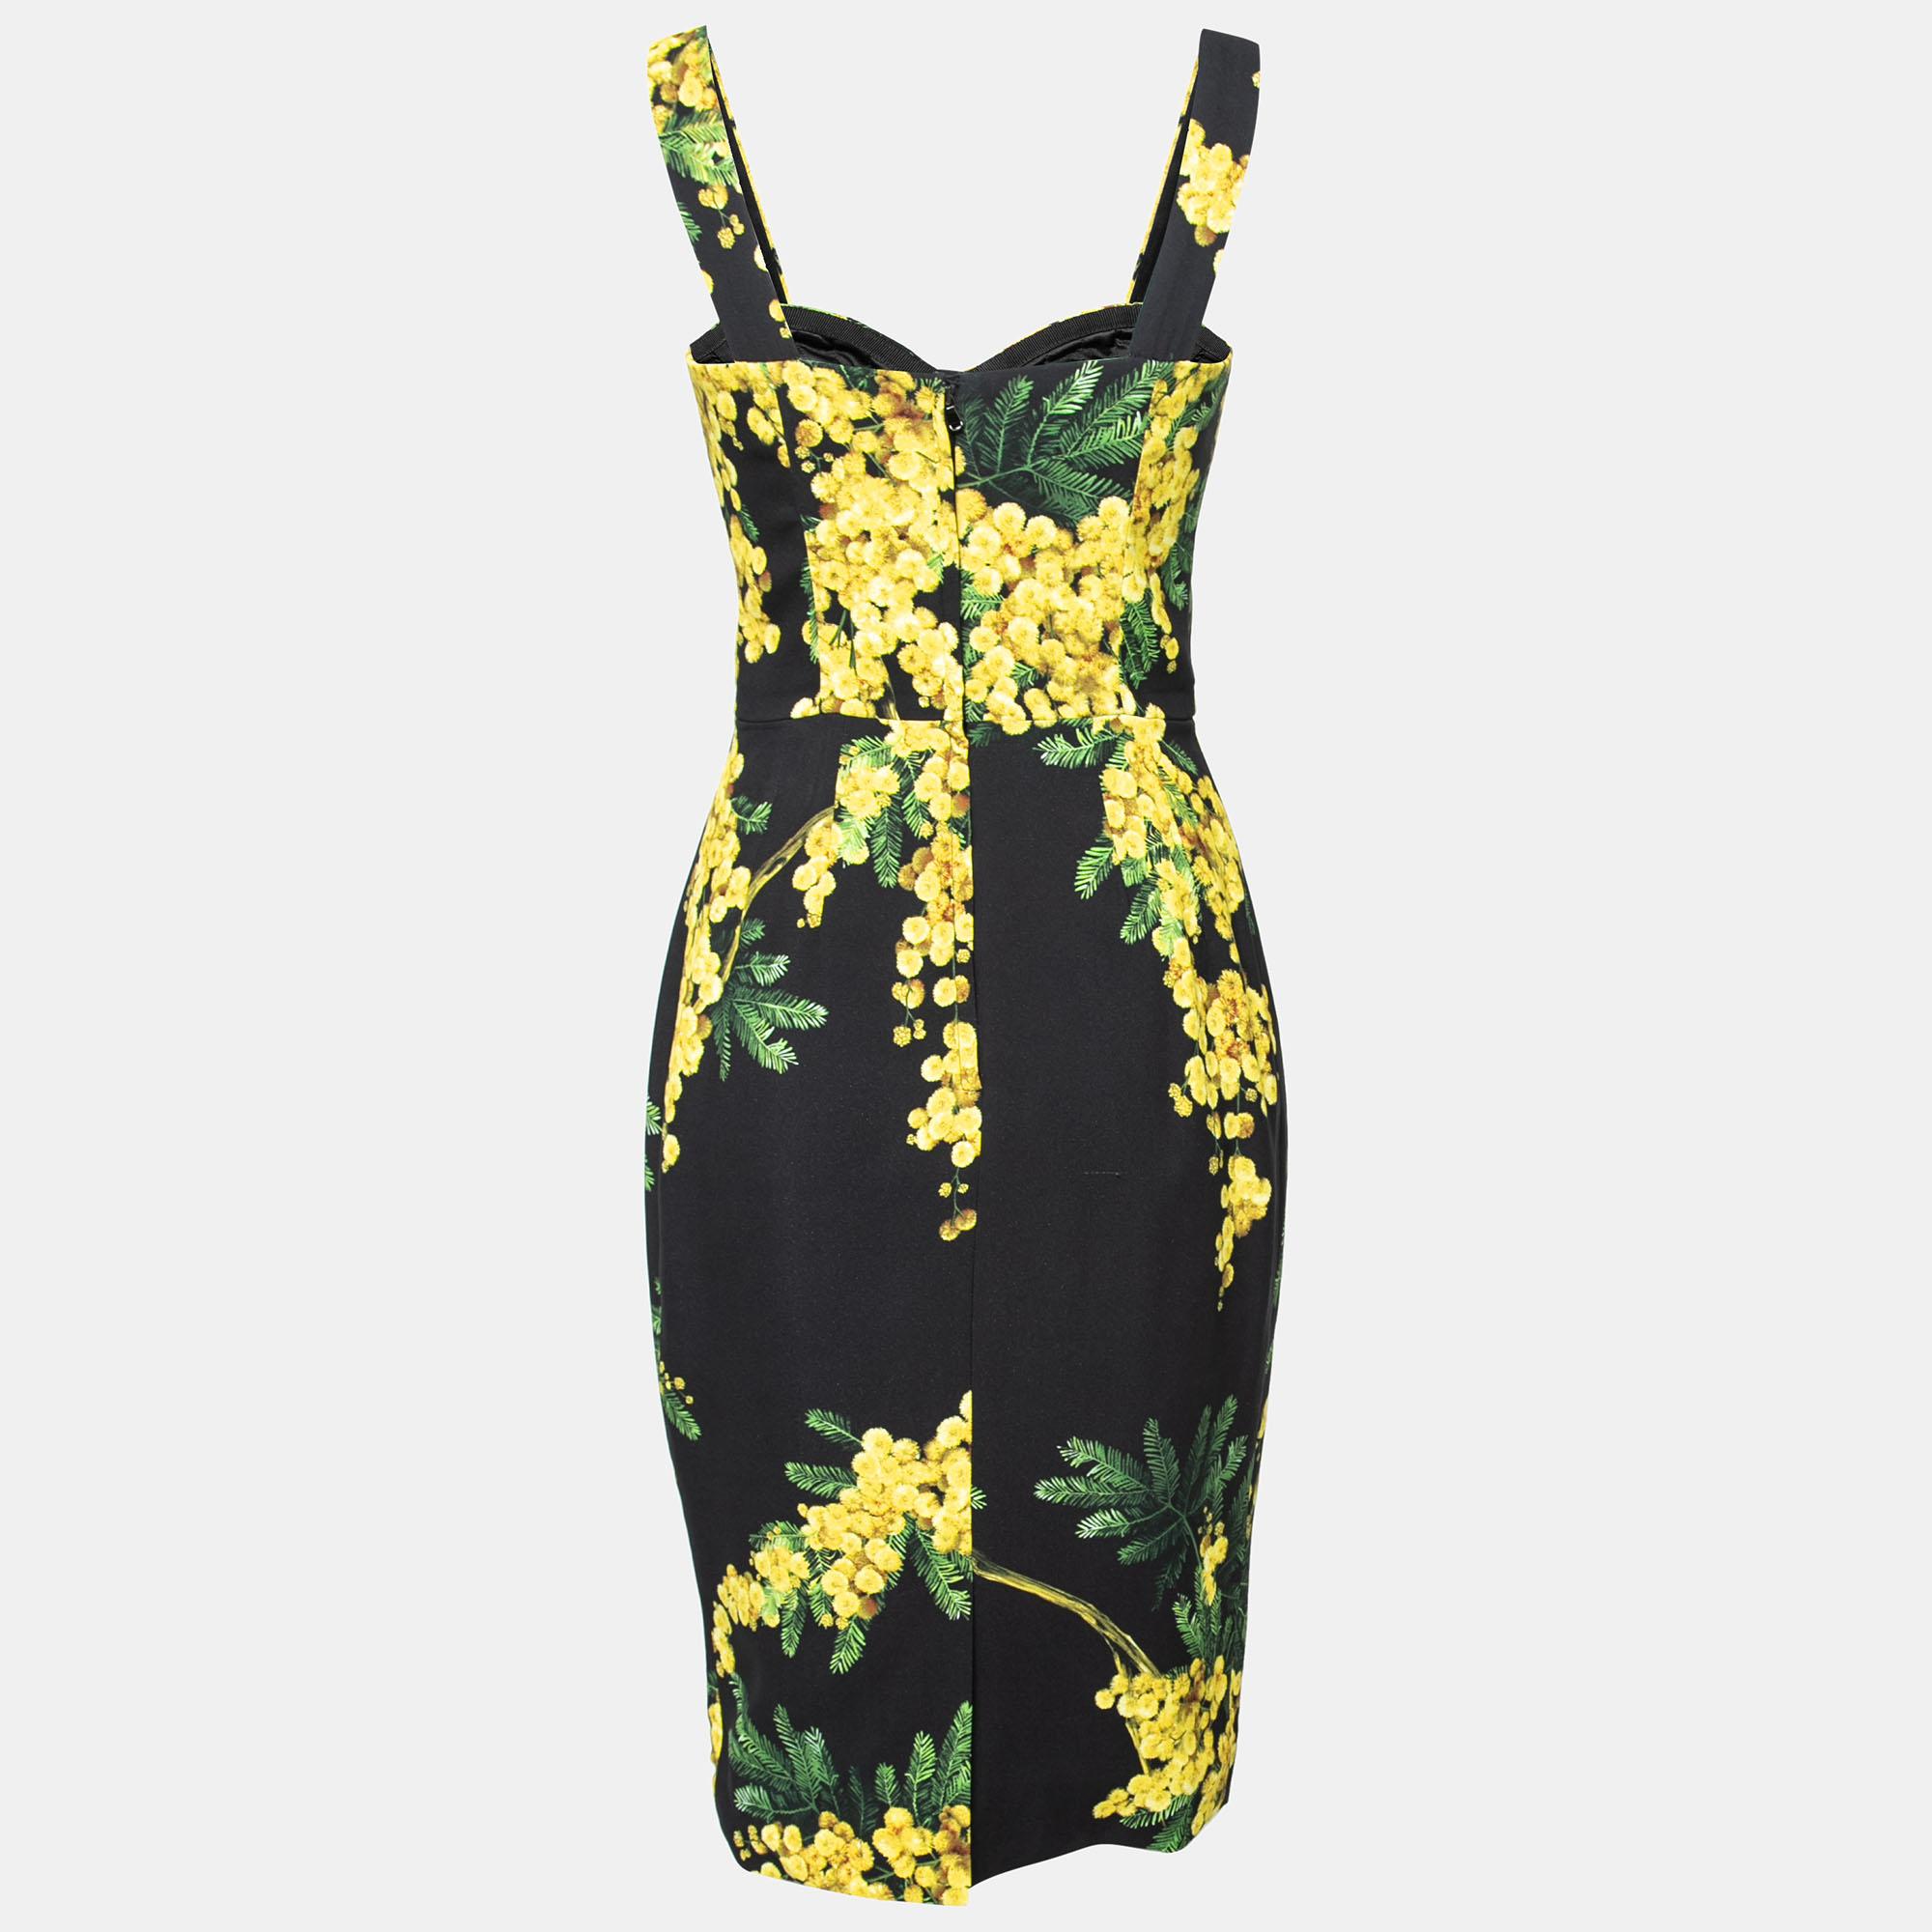 Dolce & Gabbana's beautiful dress will spring you right into the warm memories of summer! Endowed with Mimosa floral prints, this black-yellow silhouette exhibits broad shoulder straps and a bustier fit. A zipper is added for fastening. Style this